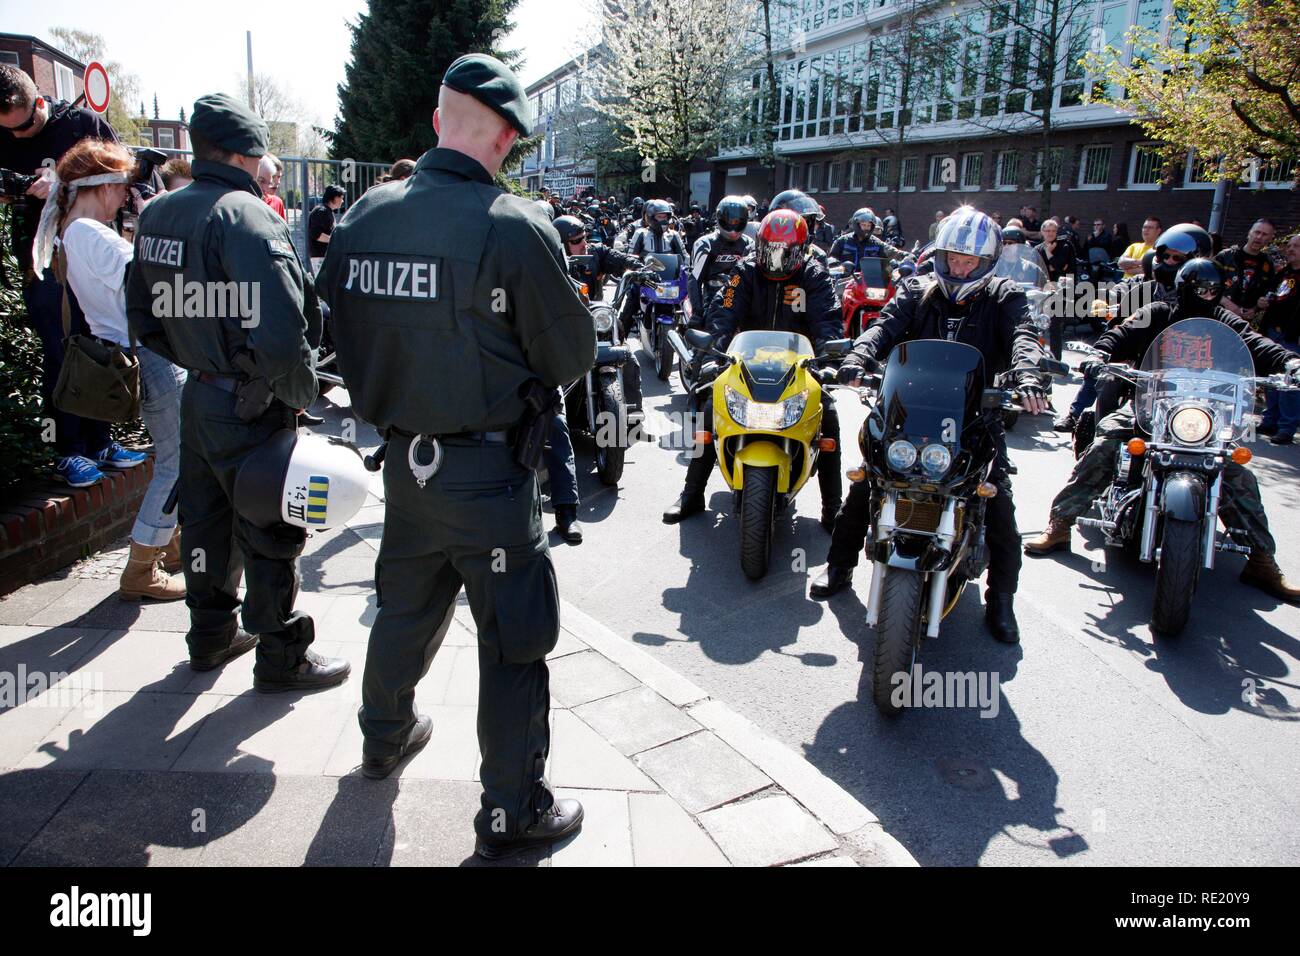 Police action at a get-together of the Bandidos motorcycle club, the City Run 2010 through downtown Essen Stock Photo